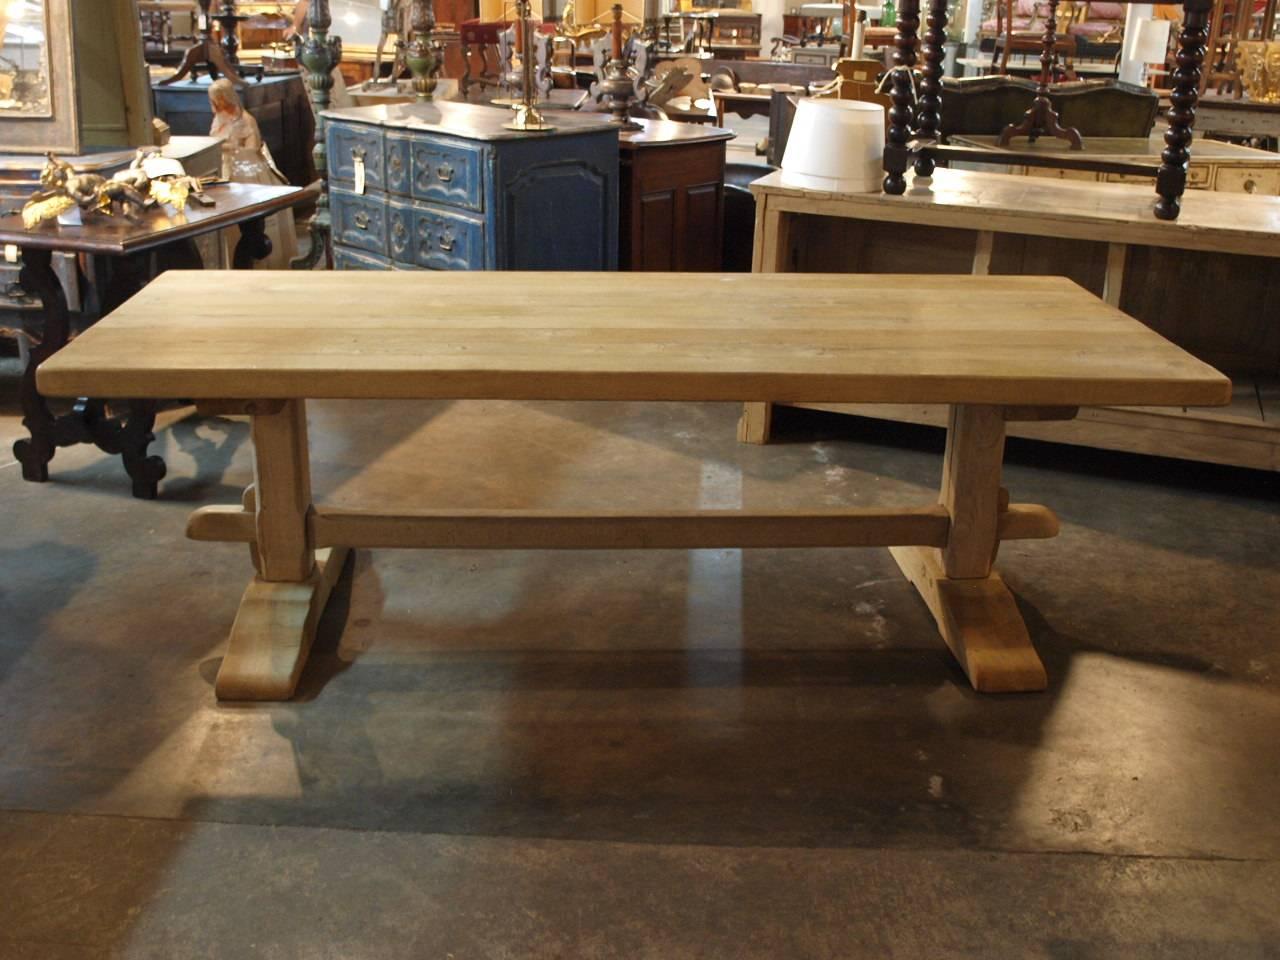 A very handsome late 19th century turn of the century farm table, trestle table beautifully constructed from washed or bleached oak. Wonderful as a large writing table as well.